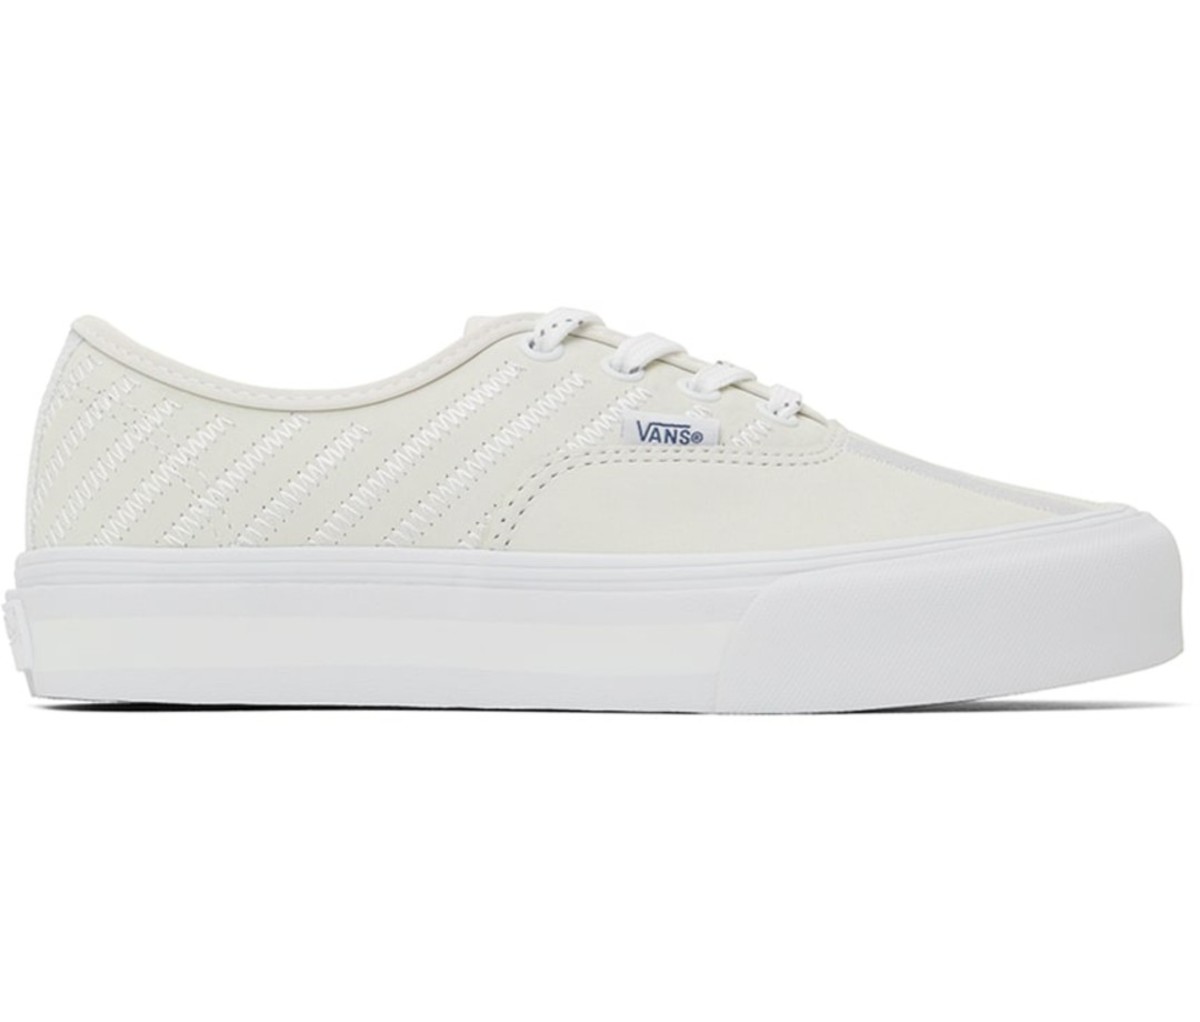 VANS Off-White Embroidered Authentic VLT LX Sneakers